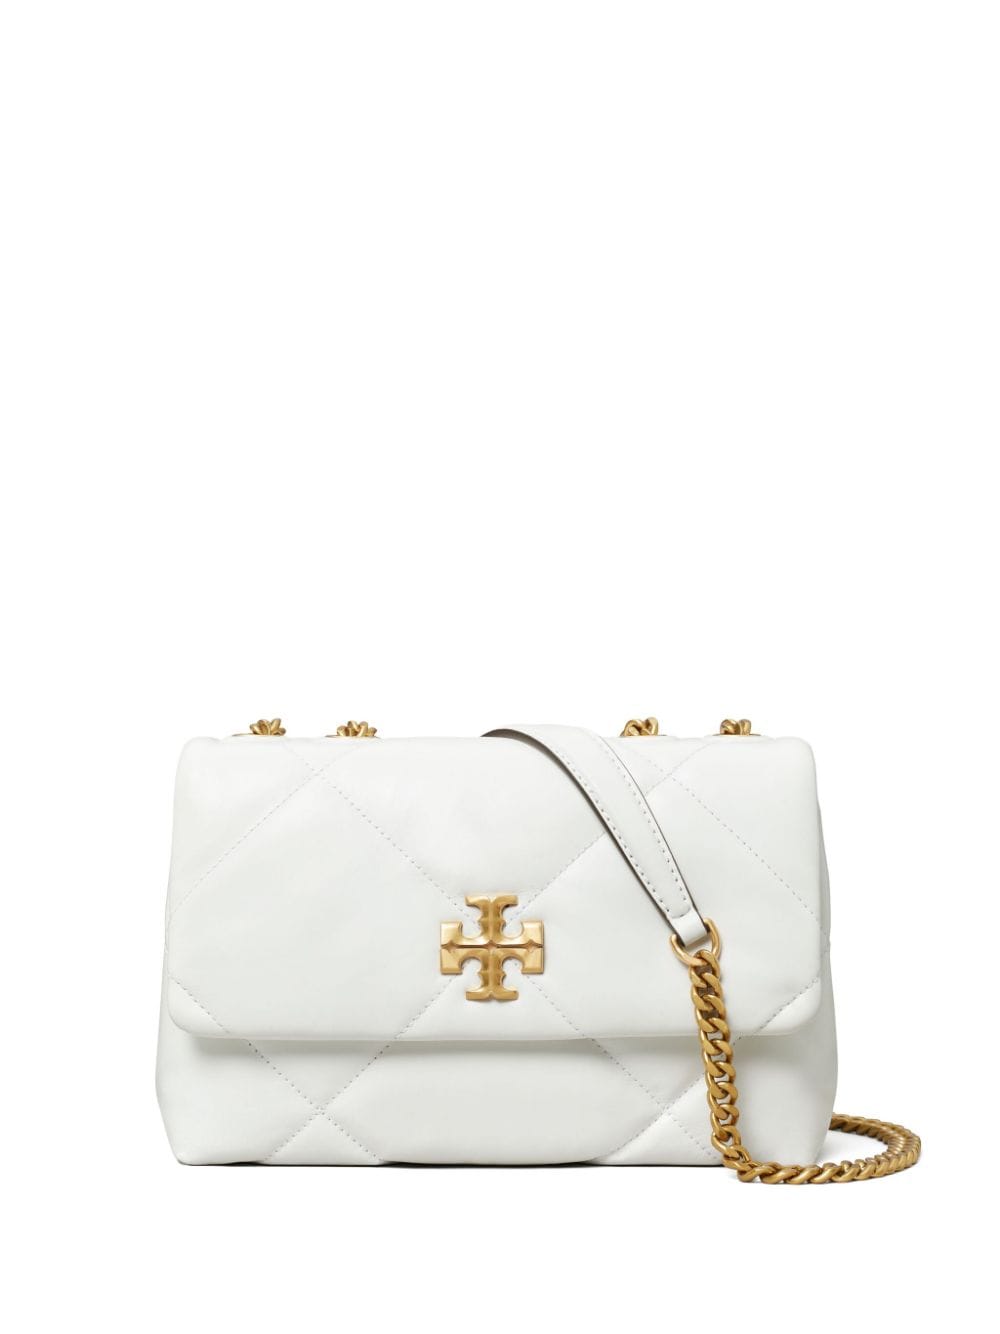 Tory Burch small Kira quilted shoulder bag - White von Tory Burch